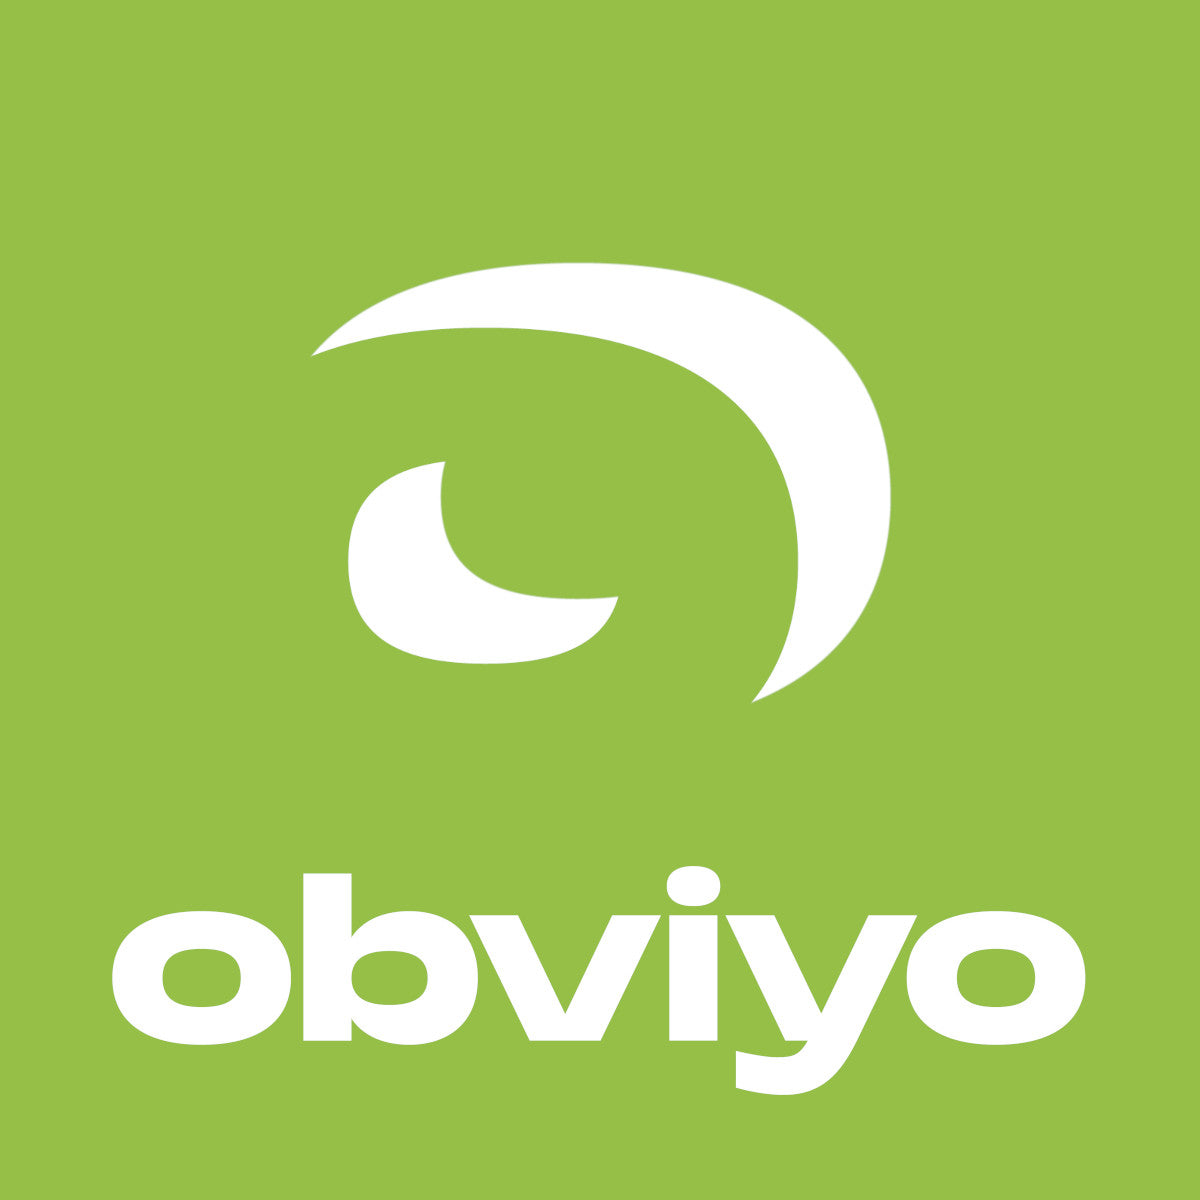 Obviyo Recommend & Personalize for Shopify